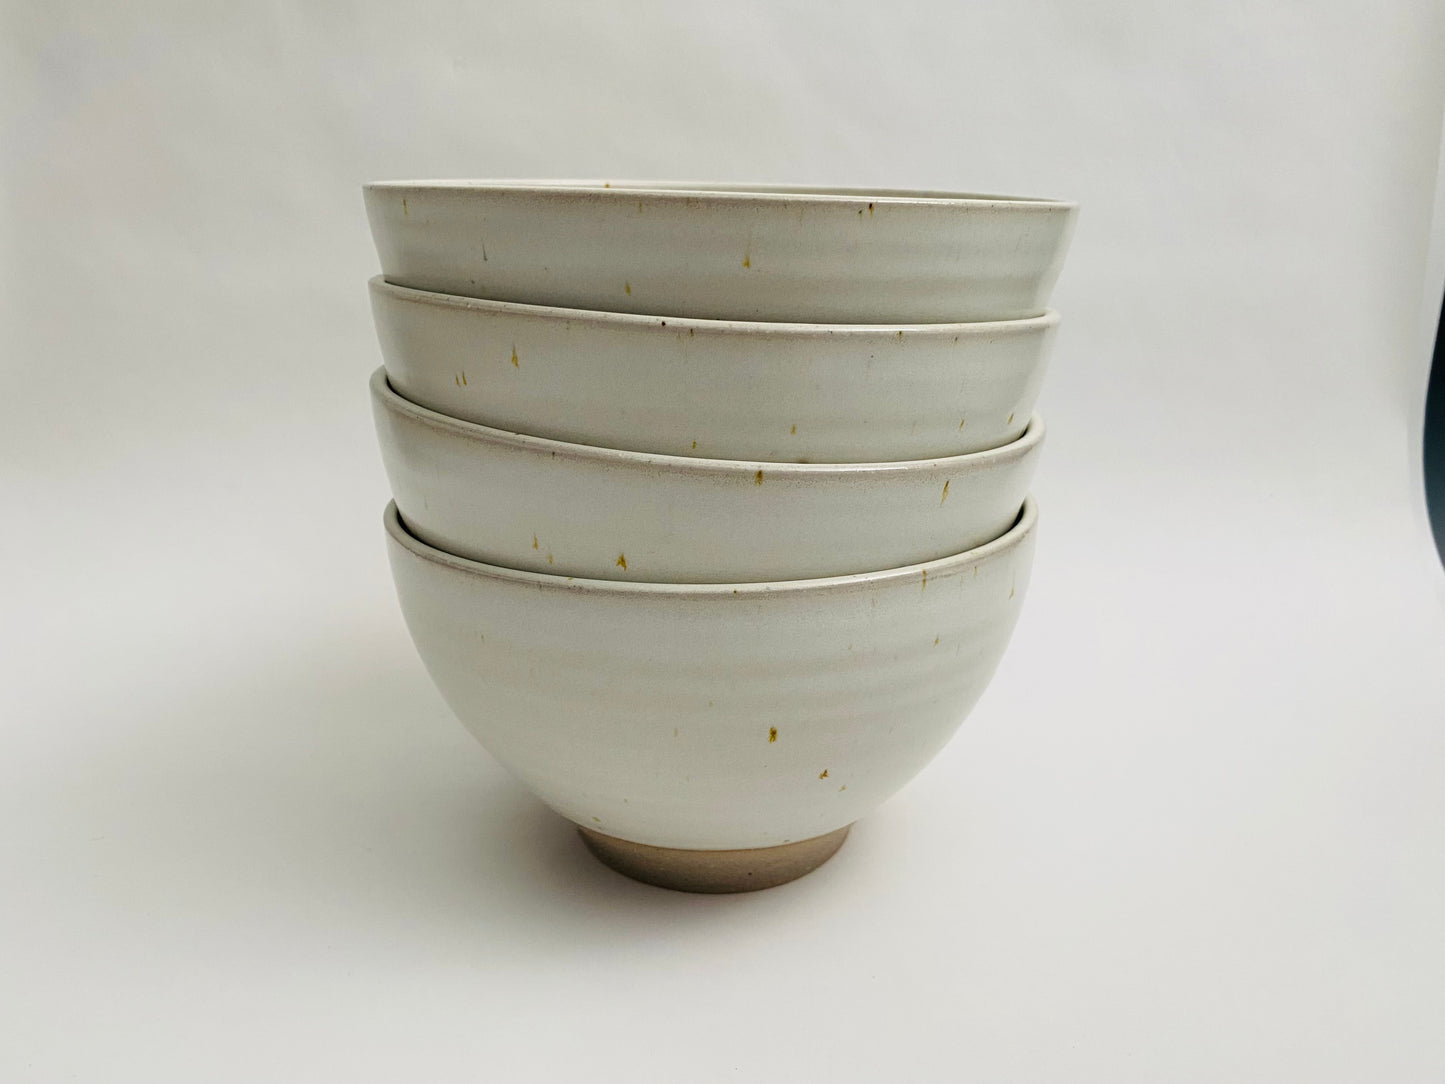 A set of 4 ramen bowls in a white glaze with speckles